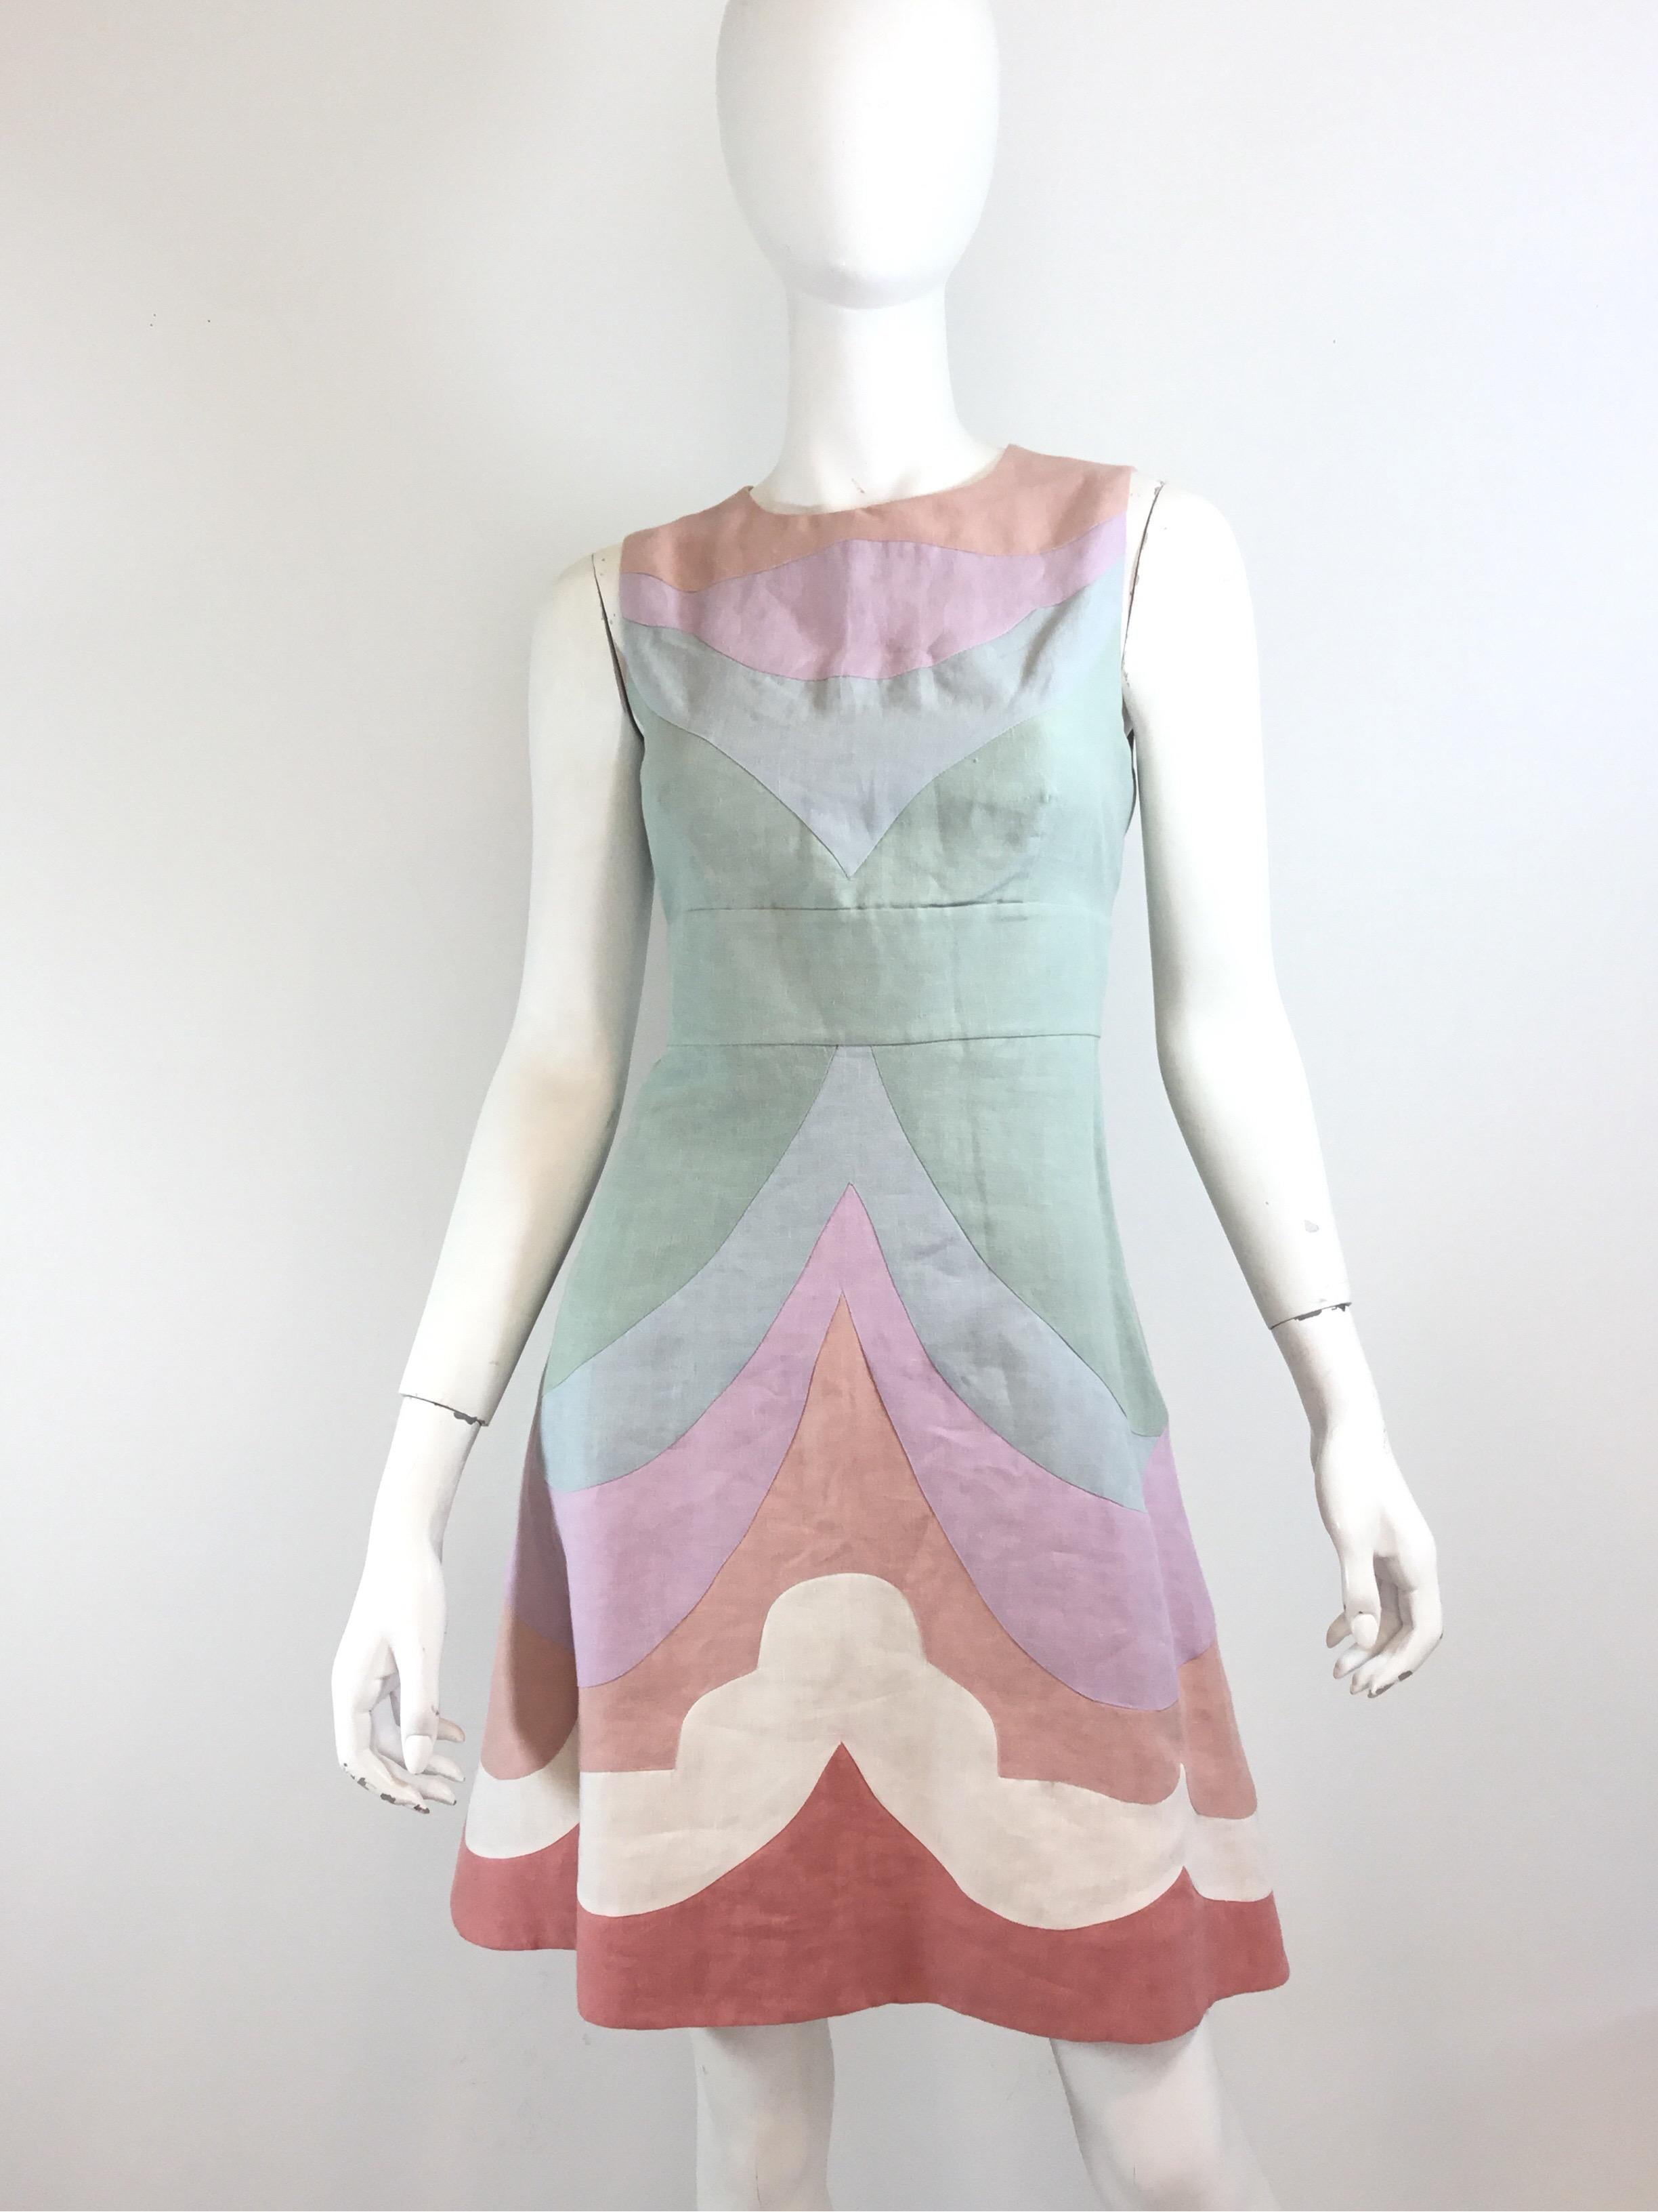 Valentino dress features a scalloped panel in pastel colors, composed of 100% linen, and labeled size 8. Dress has pockets at the waist a back zipper and hook fastening. Made in Italy. 

Bust 36”, waist 32”, hips 38”, length 35”